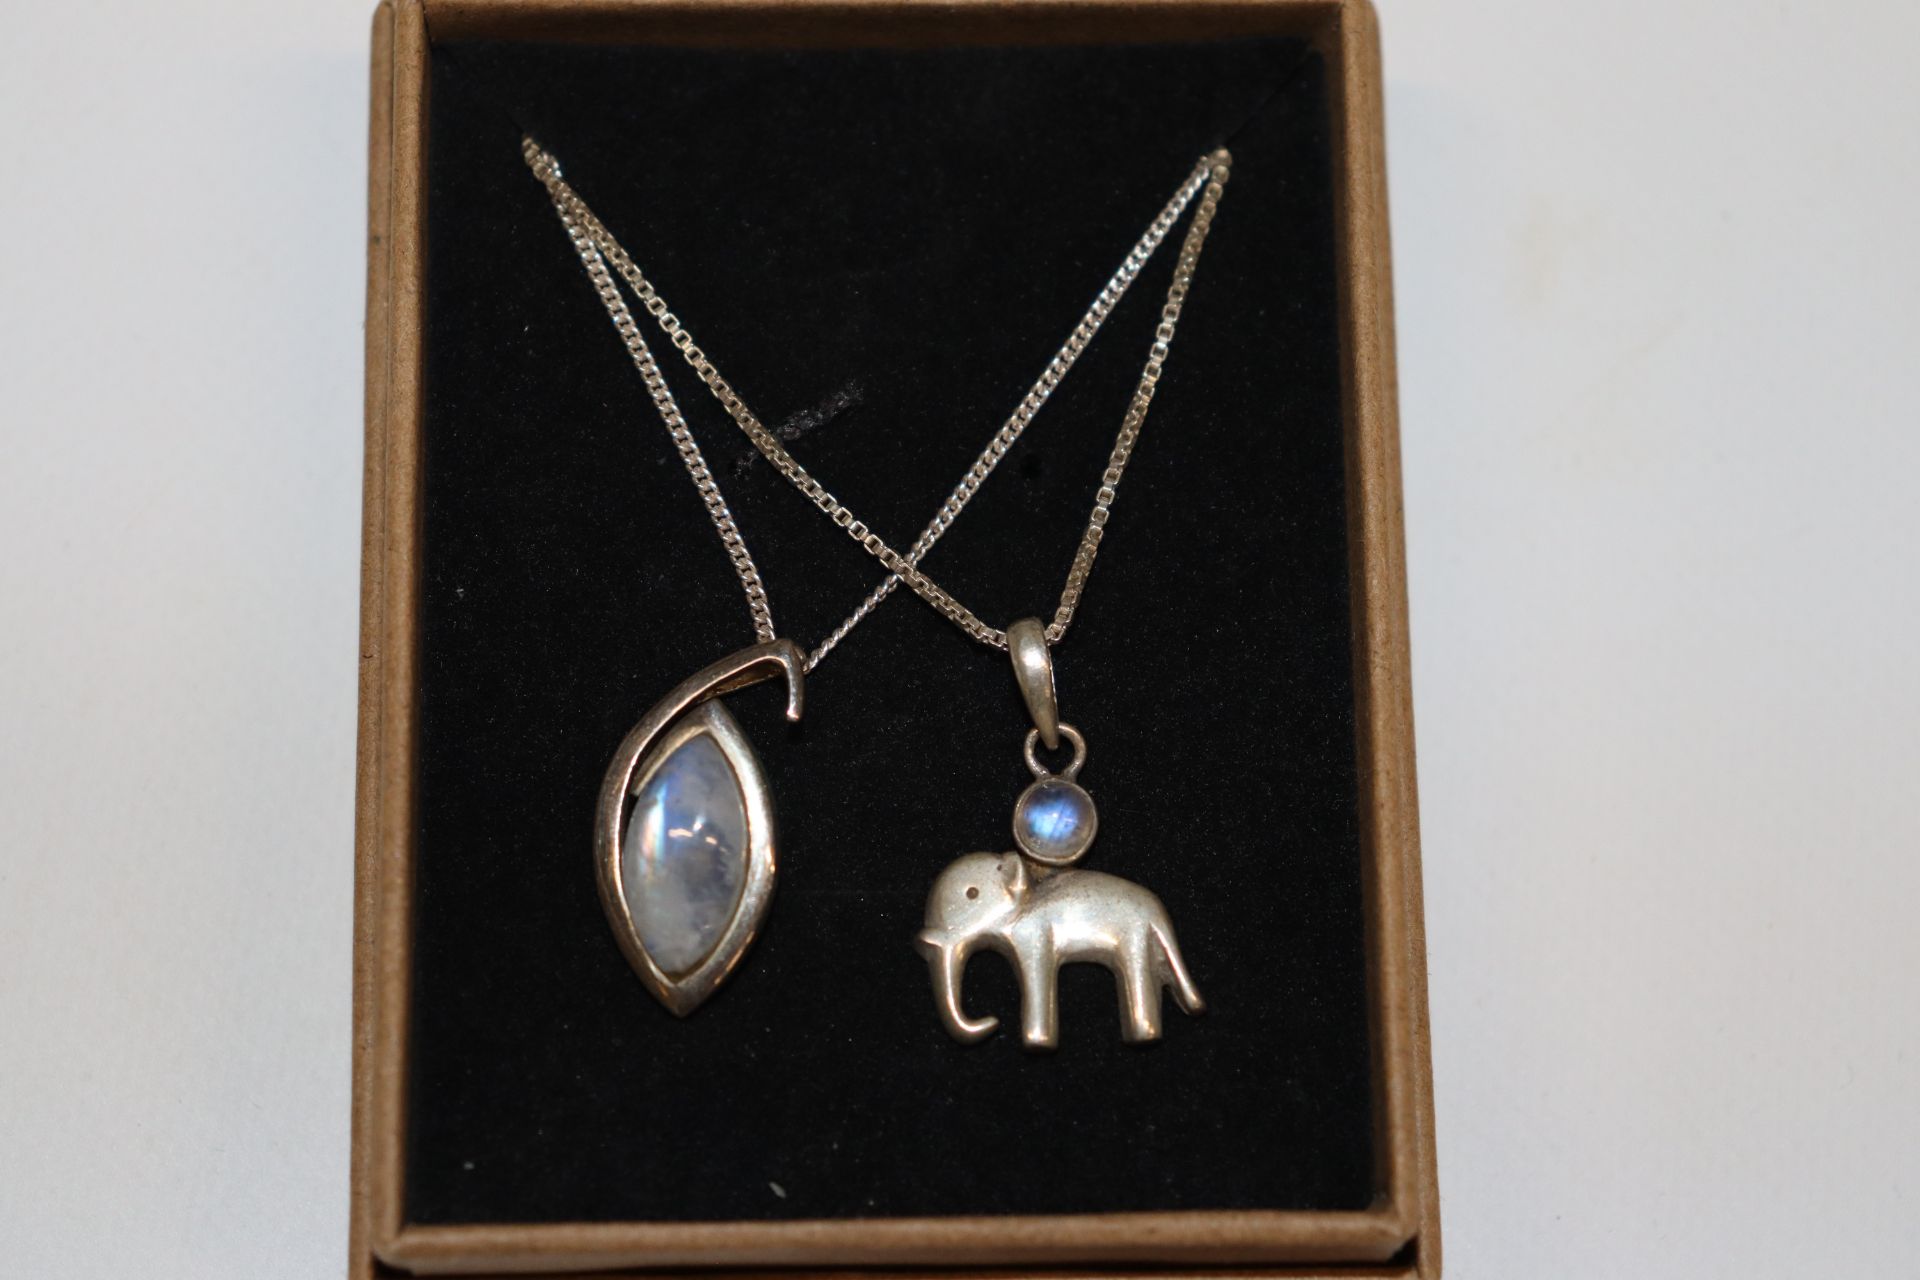 Two sterling silver and moonstone set necklaces, approx. 14gms total weight